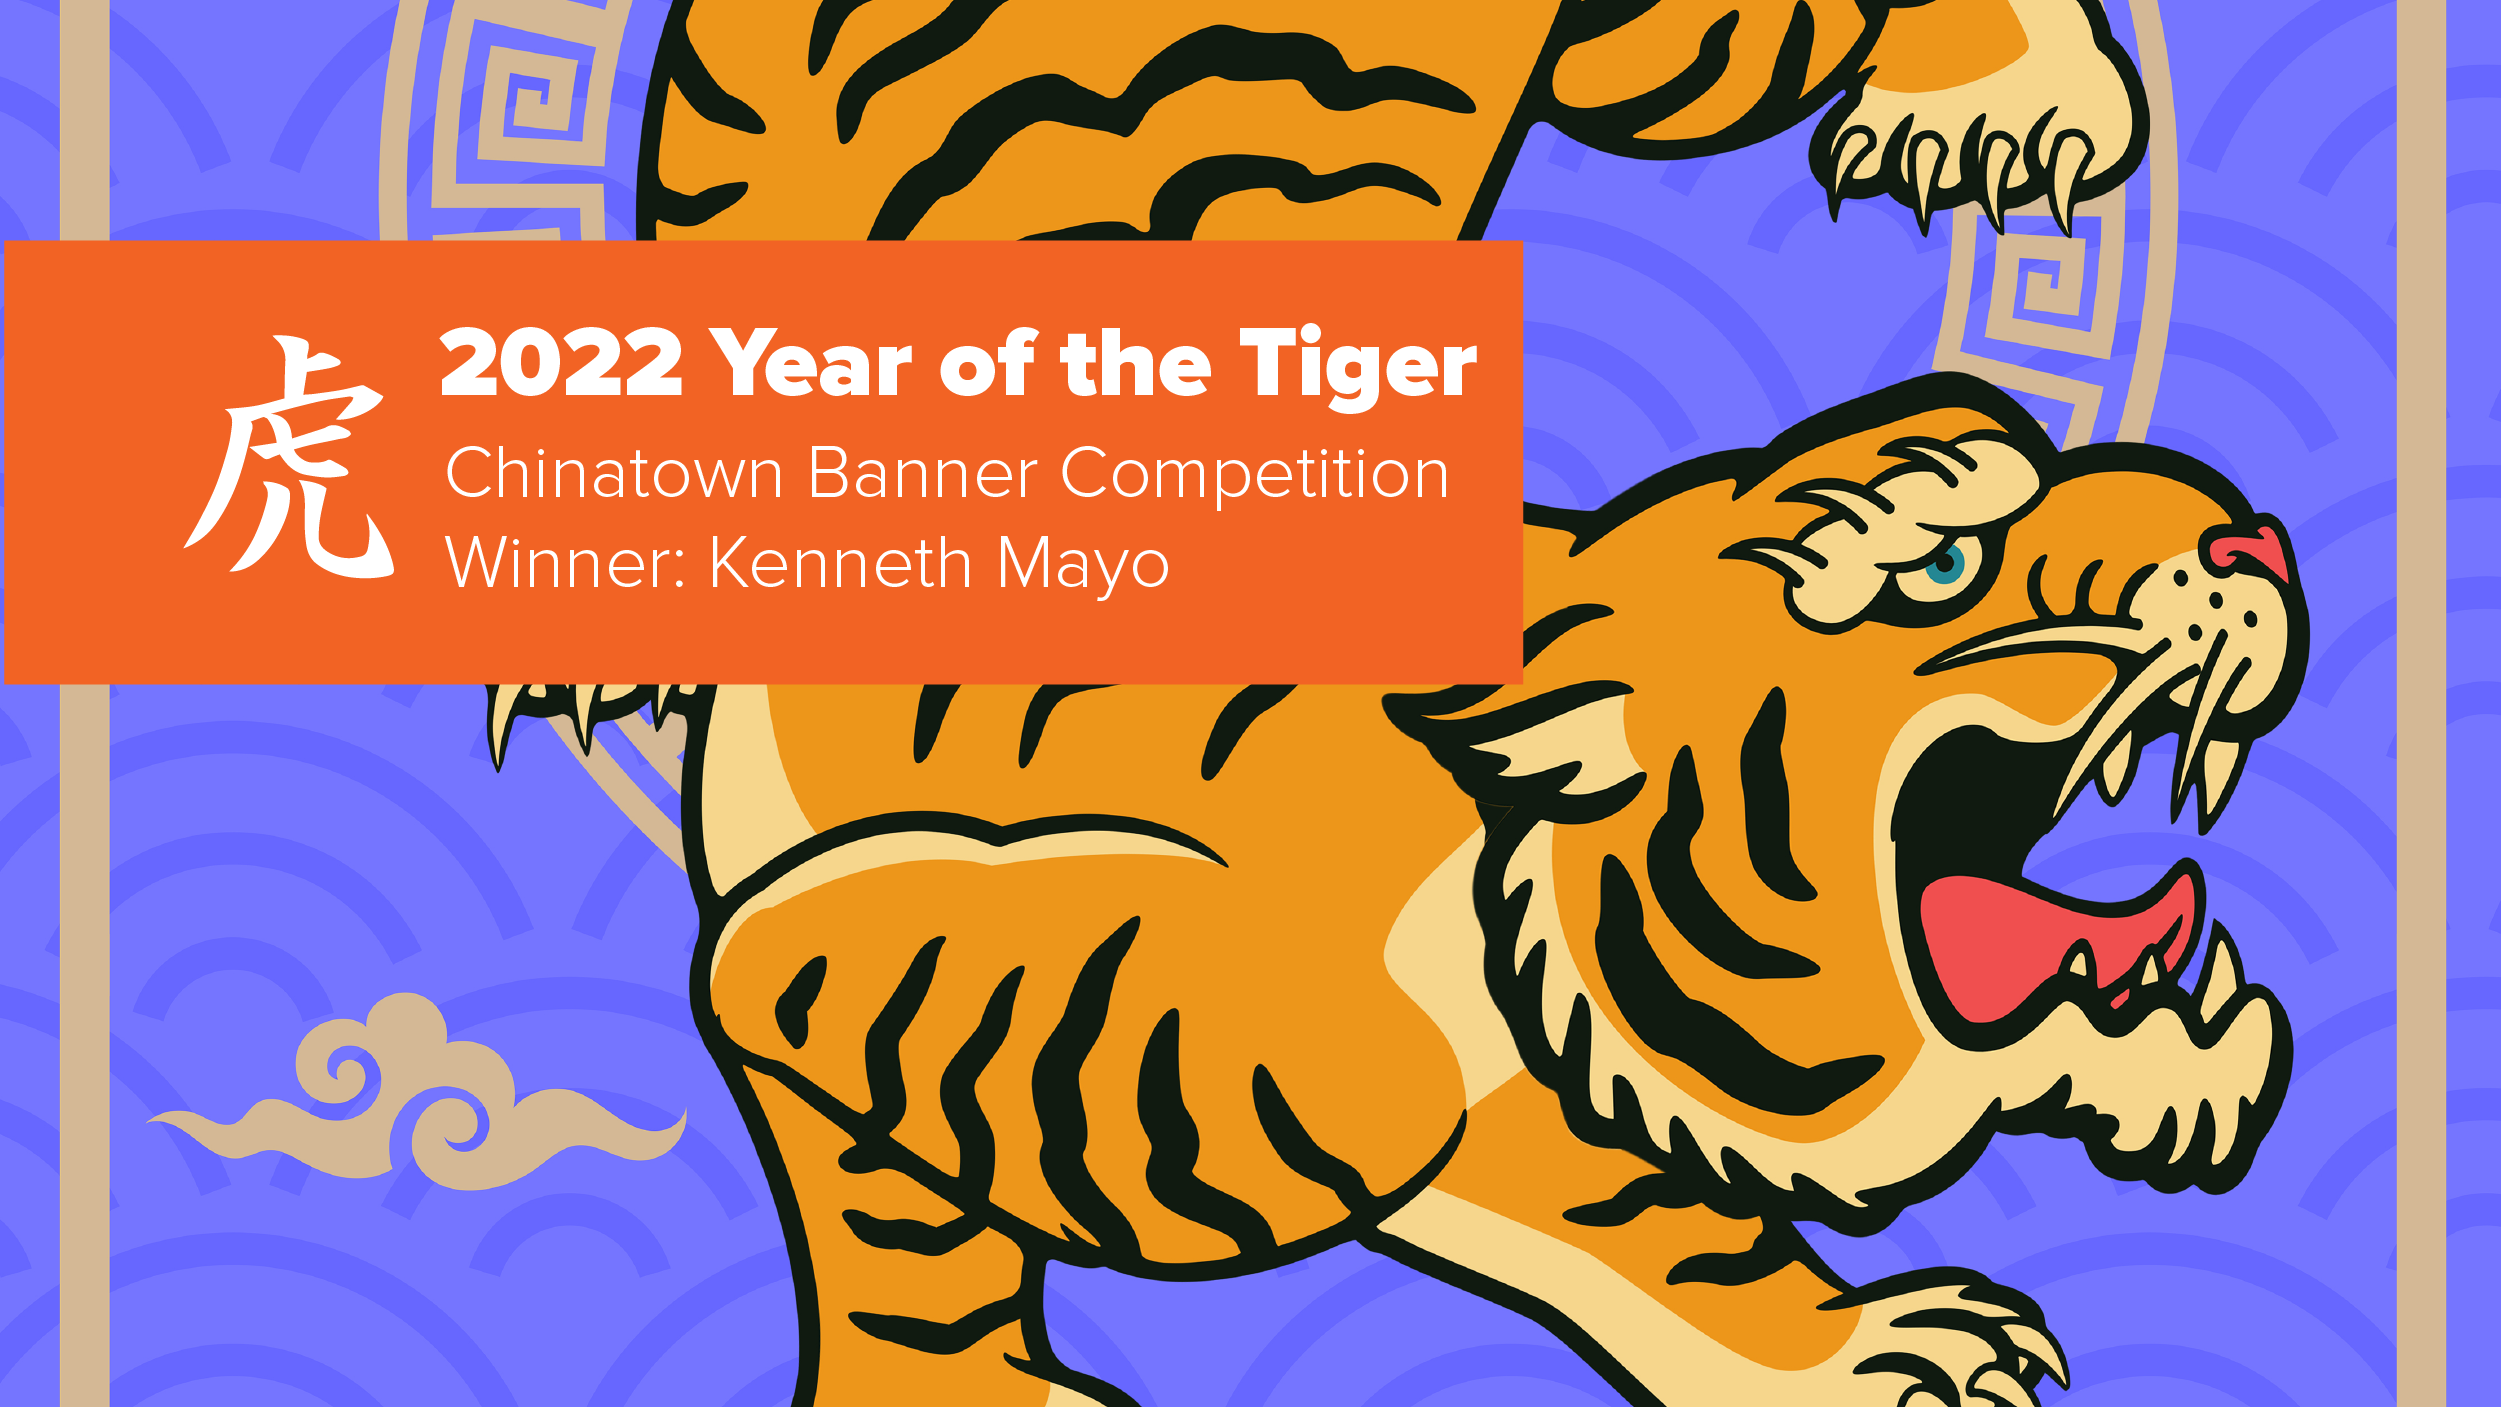 Chinatown Banner Competition 2022: Year of the Tiger